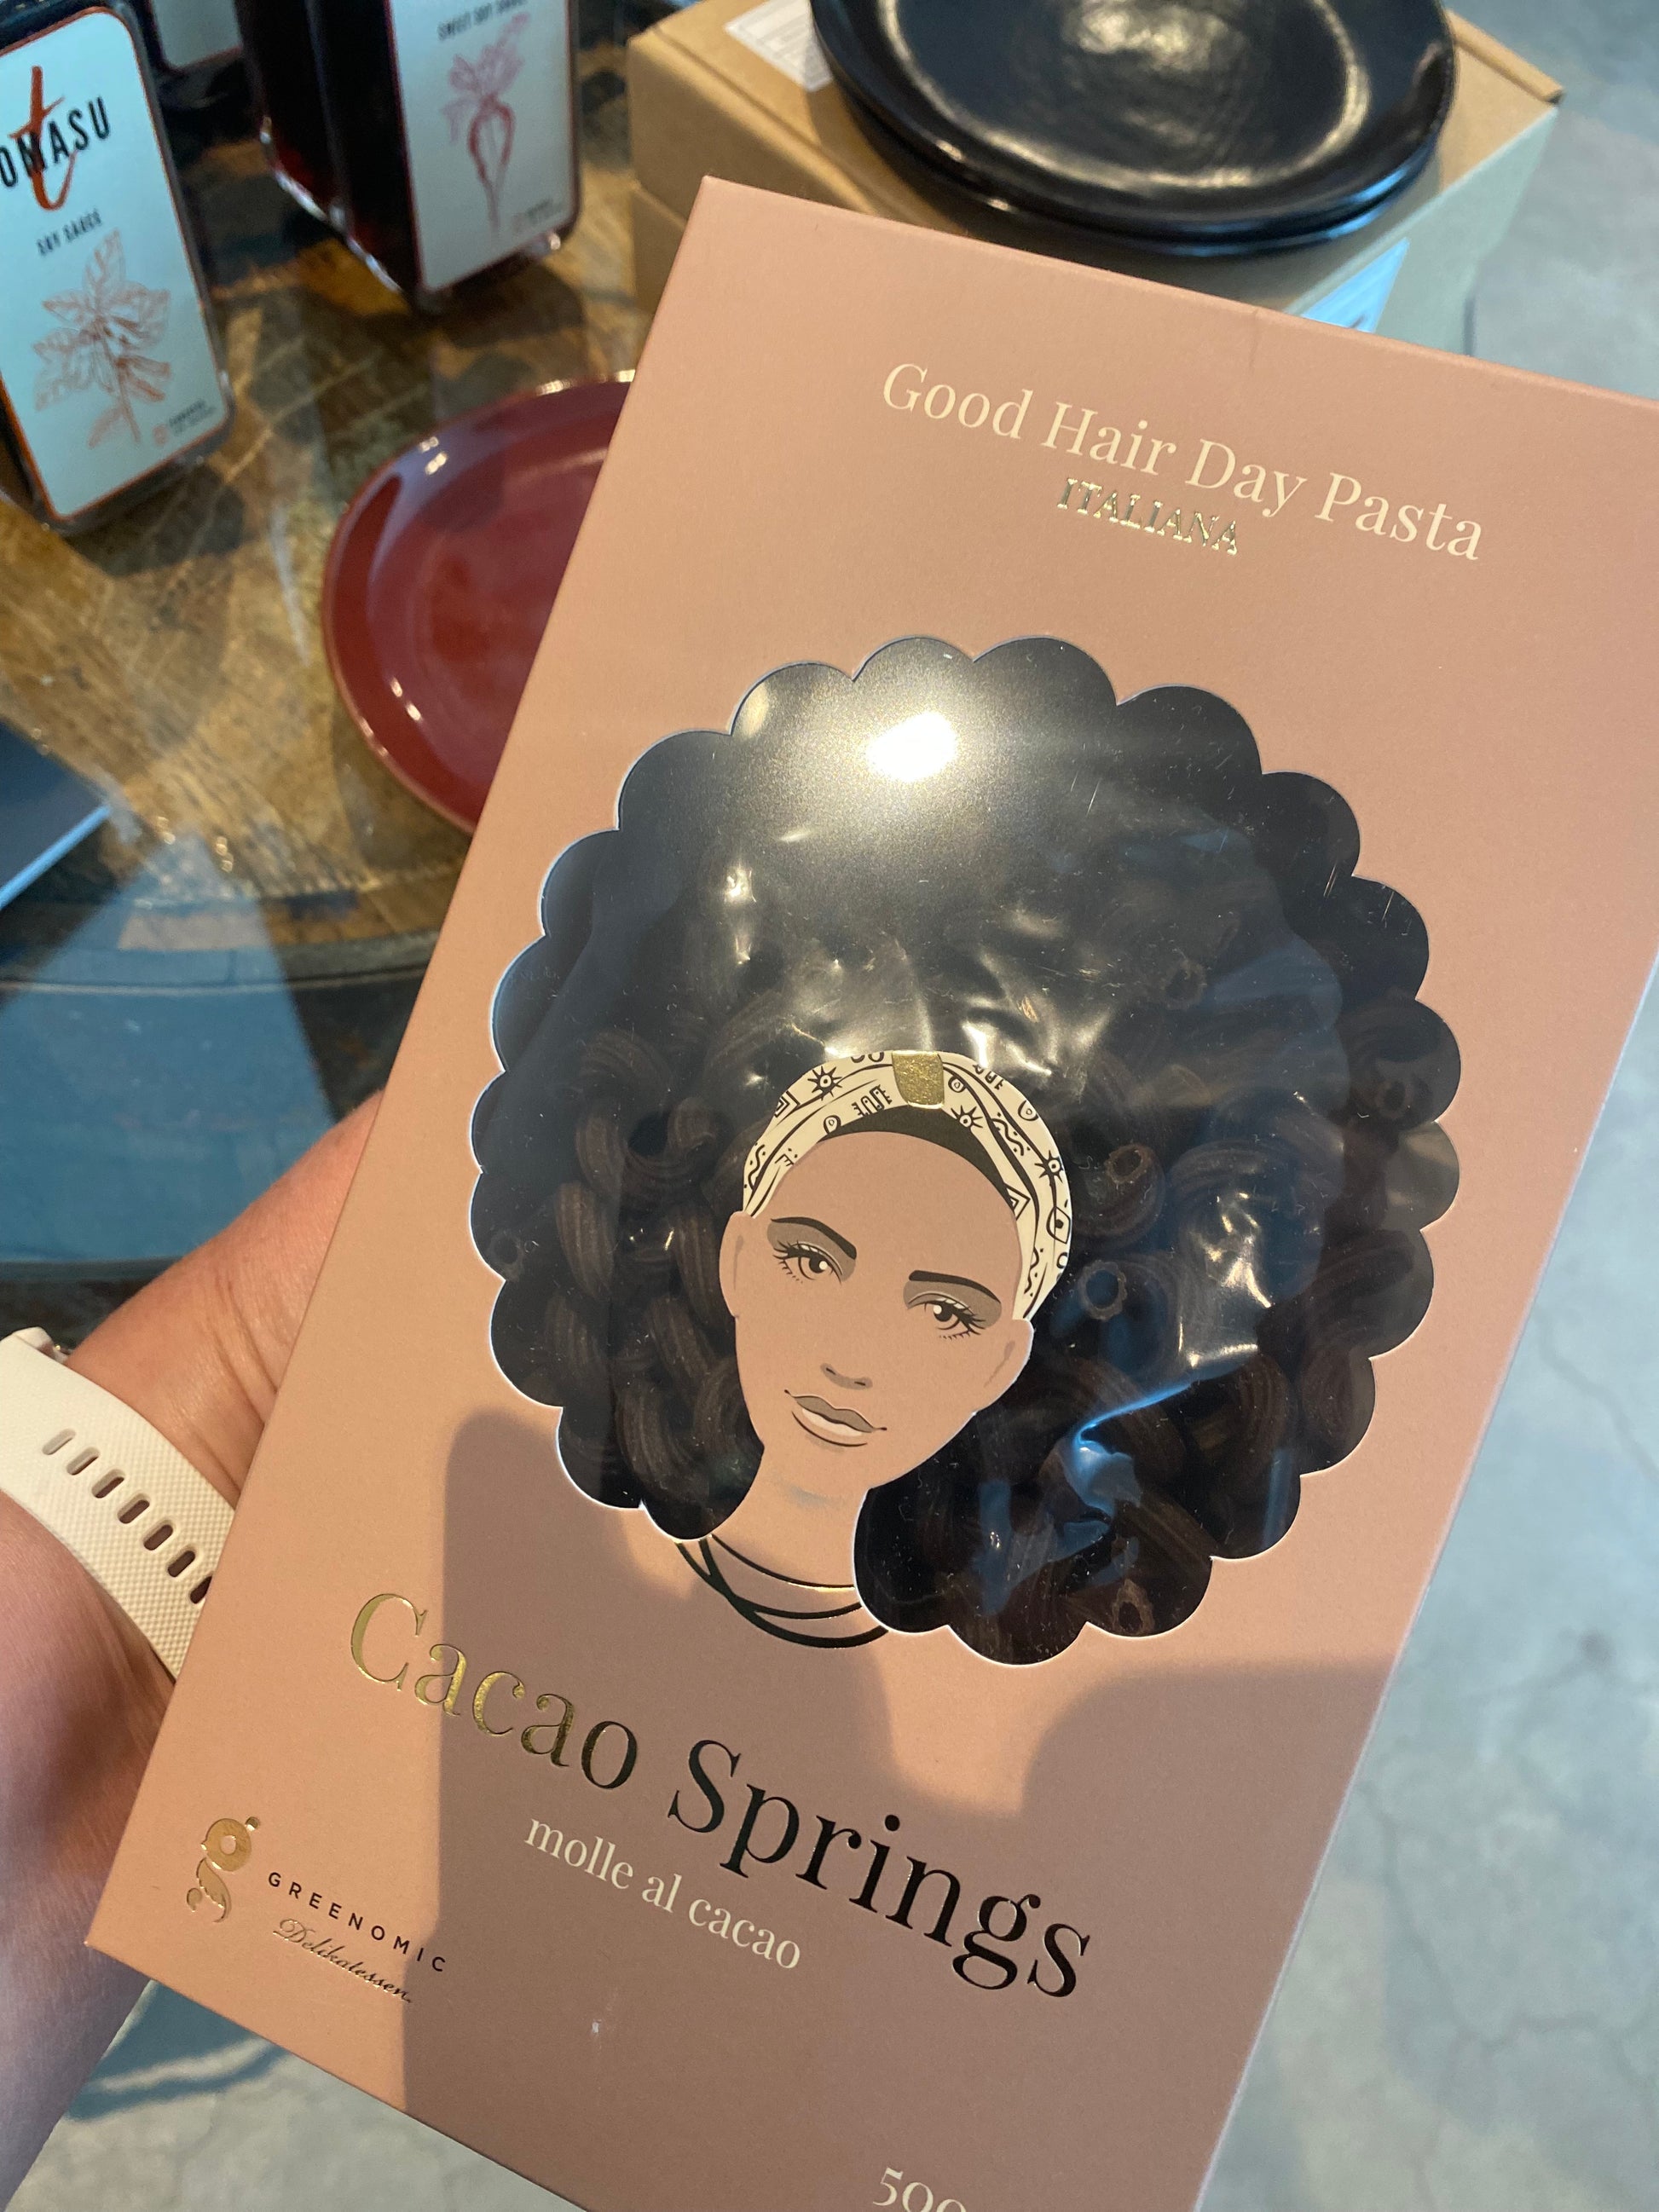 Cacao springs Good Hair Day Pasta